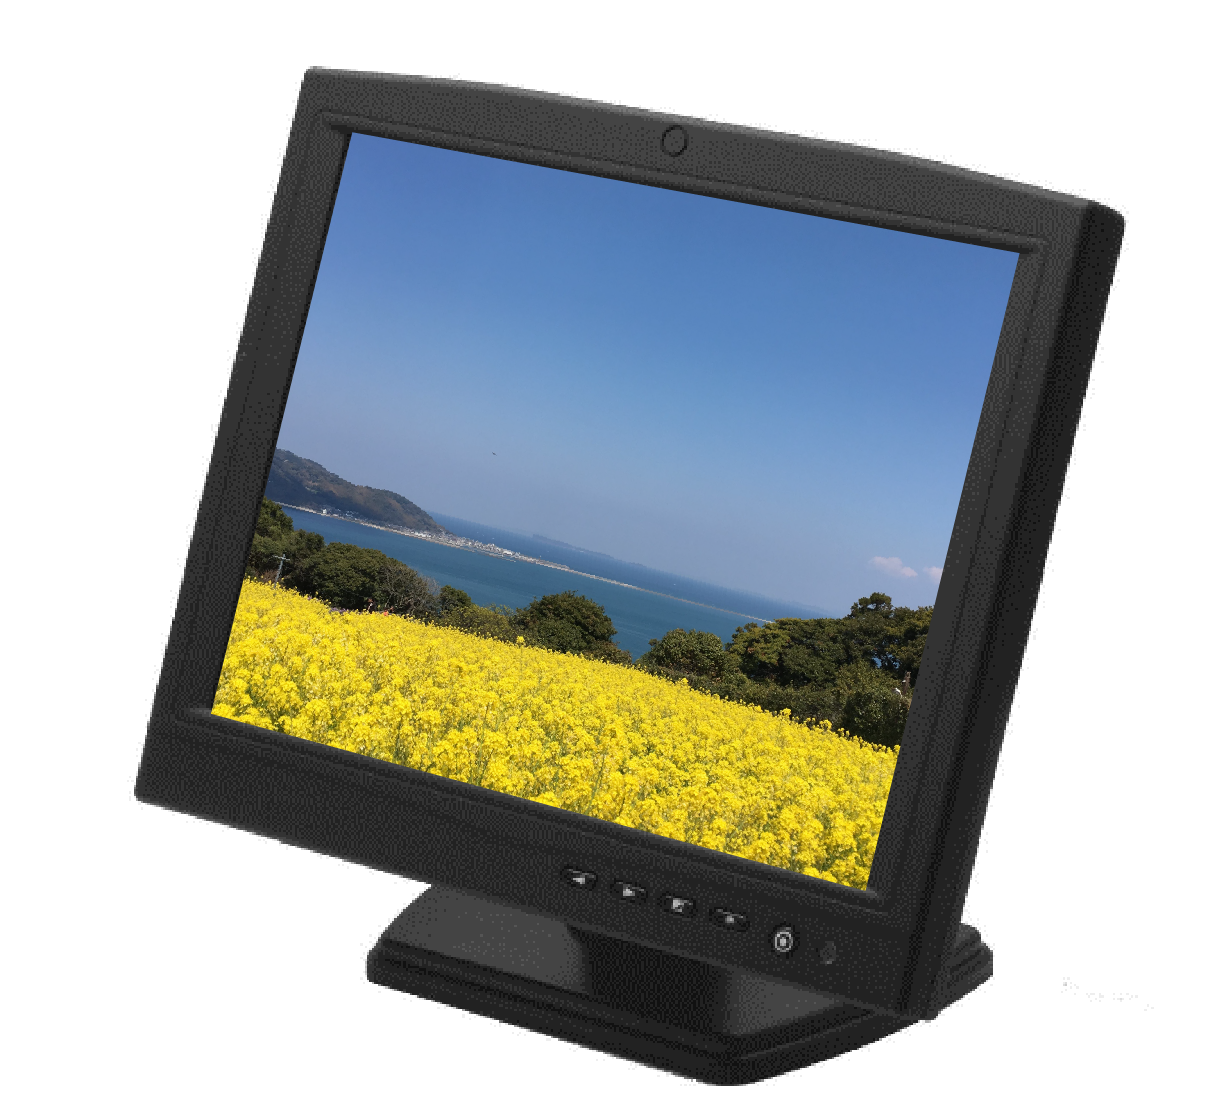 SEF104C-L-PCT is an industrial touch monitor which can be used to any kinds of vehicles.